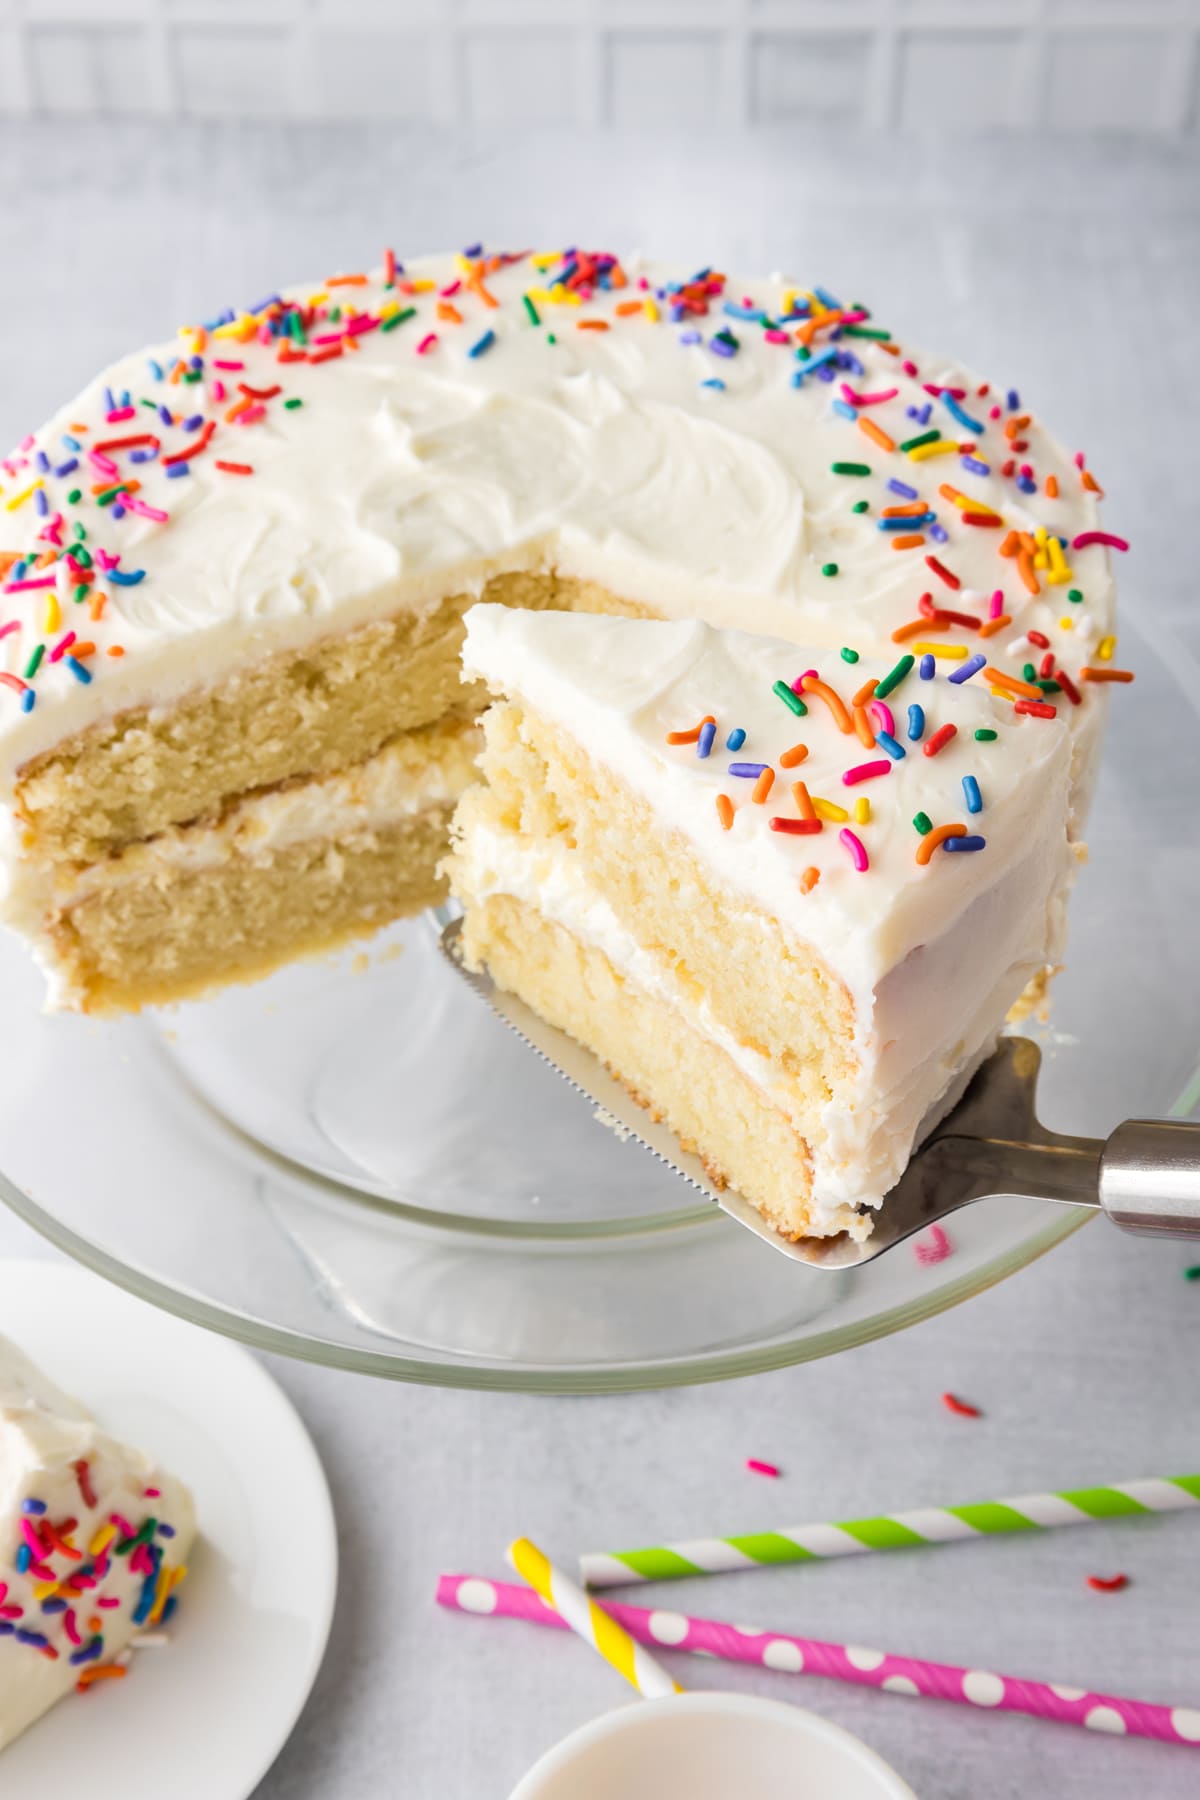 Overhead view of a vanilla layer cake with a slice being served